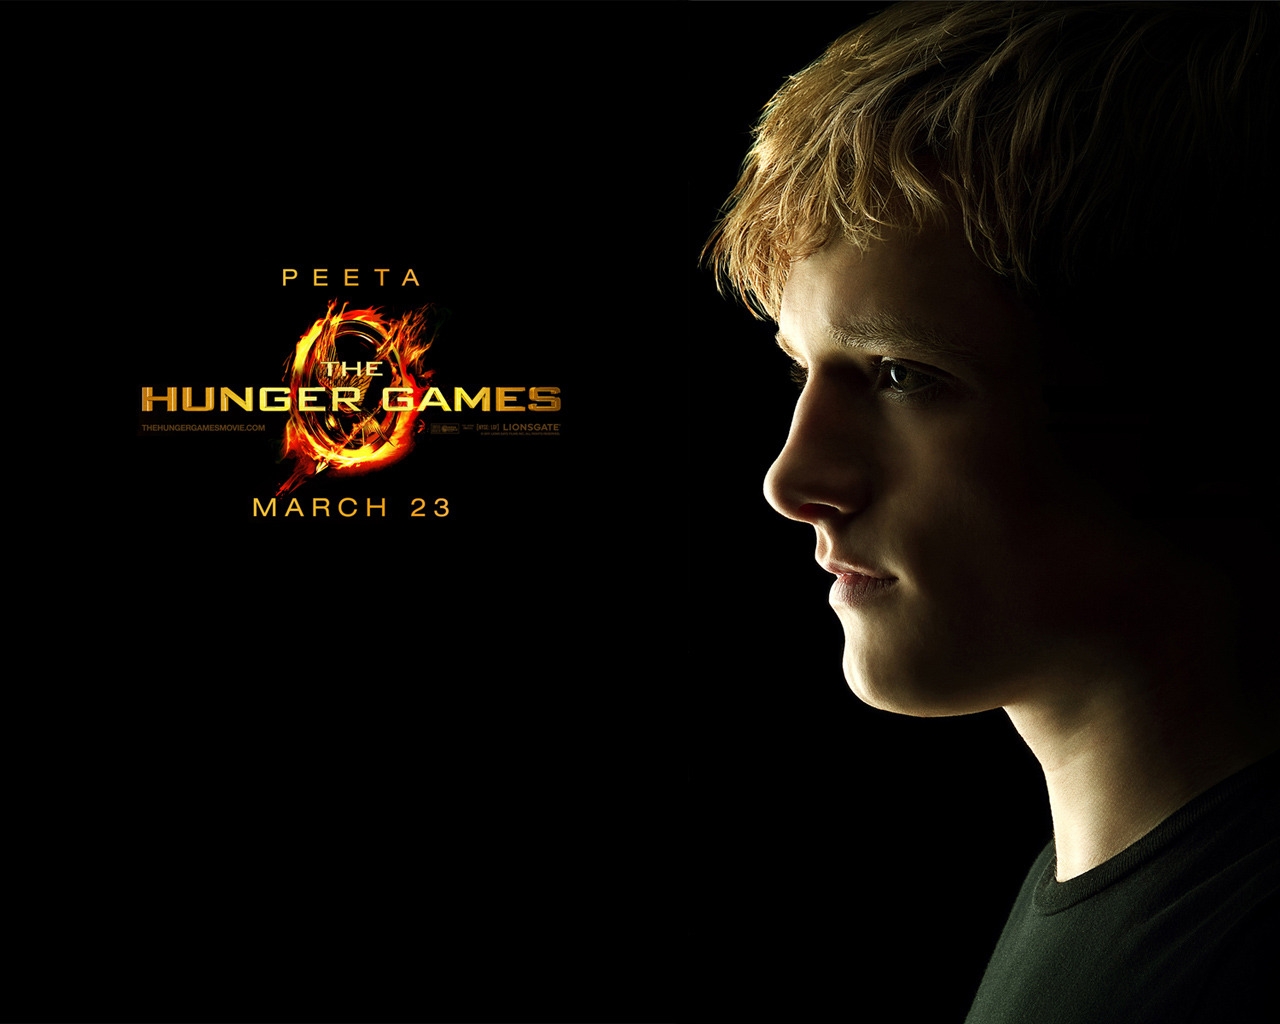 The Hunger Games Peeta for 1280 x 1024 resolution